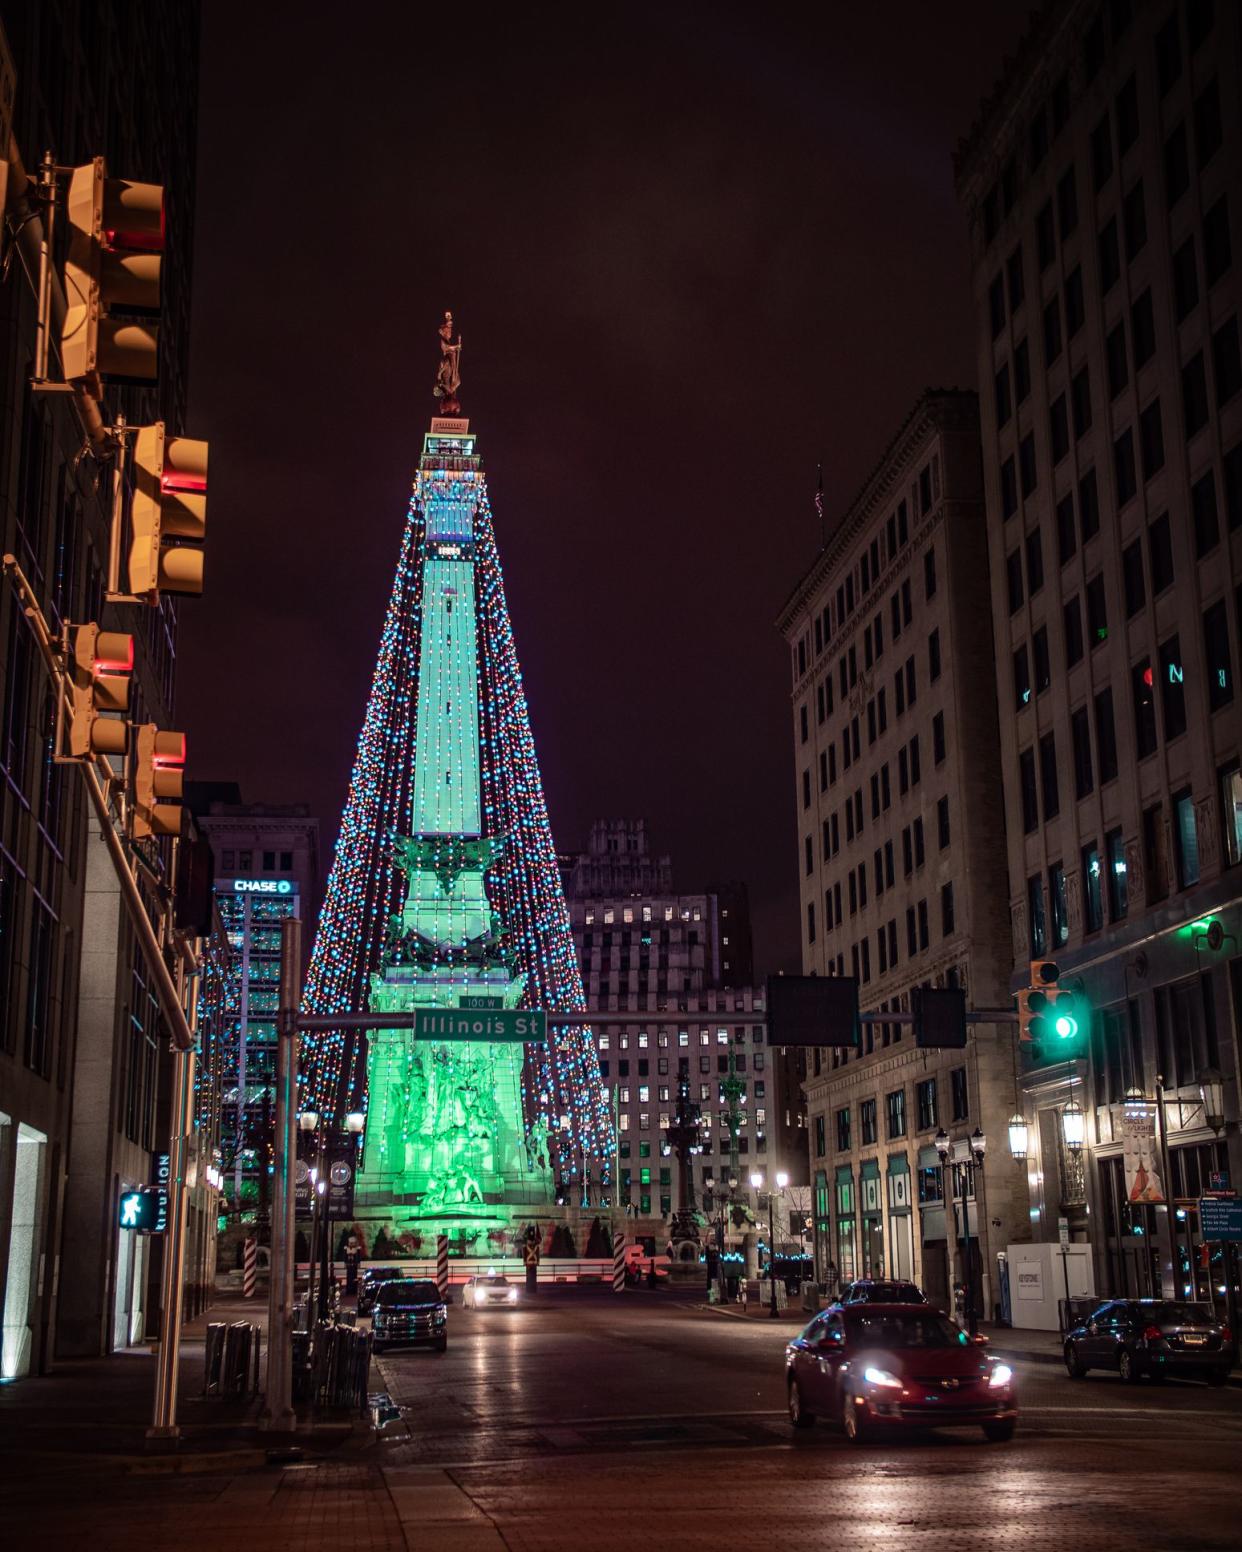 Large lit Christmas tree Fountain Square, Downtown Indianapolis, lights lit at night, with a car driving on a road